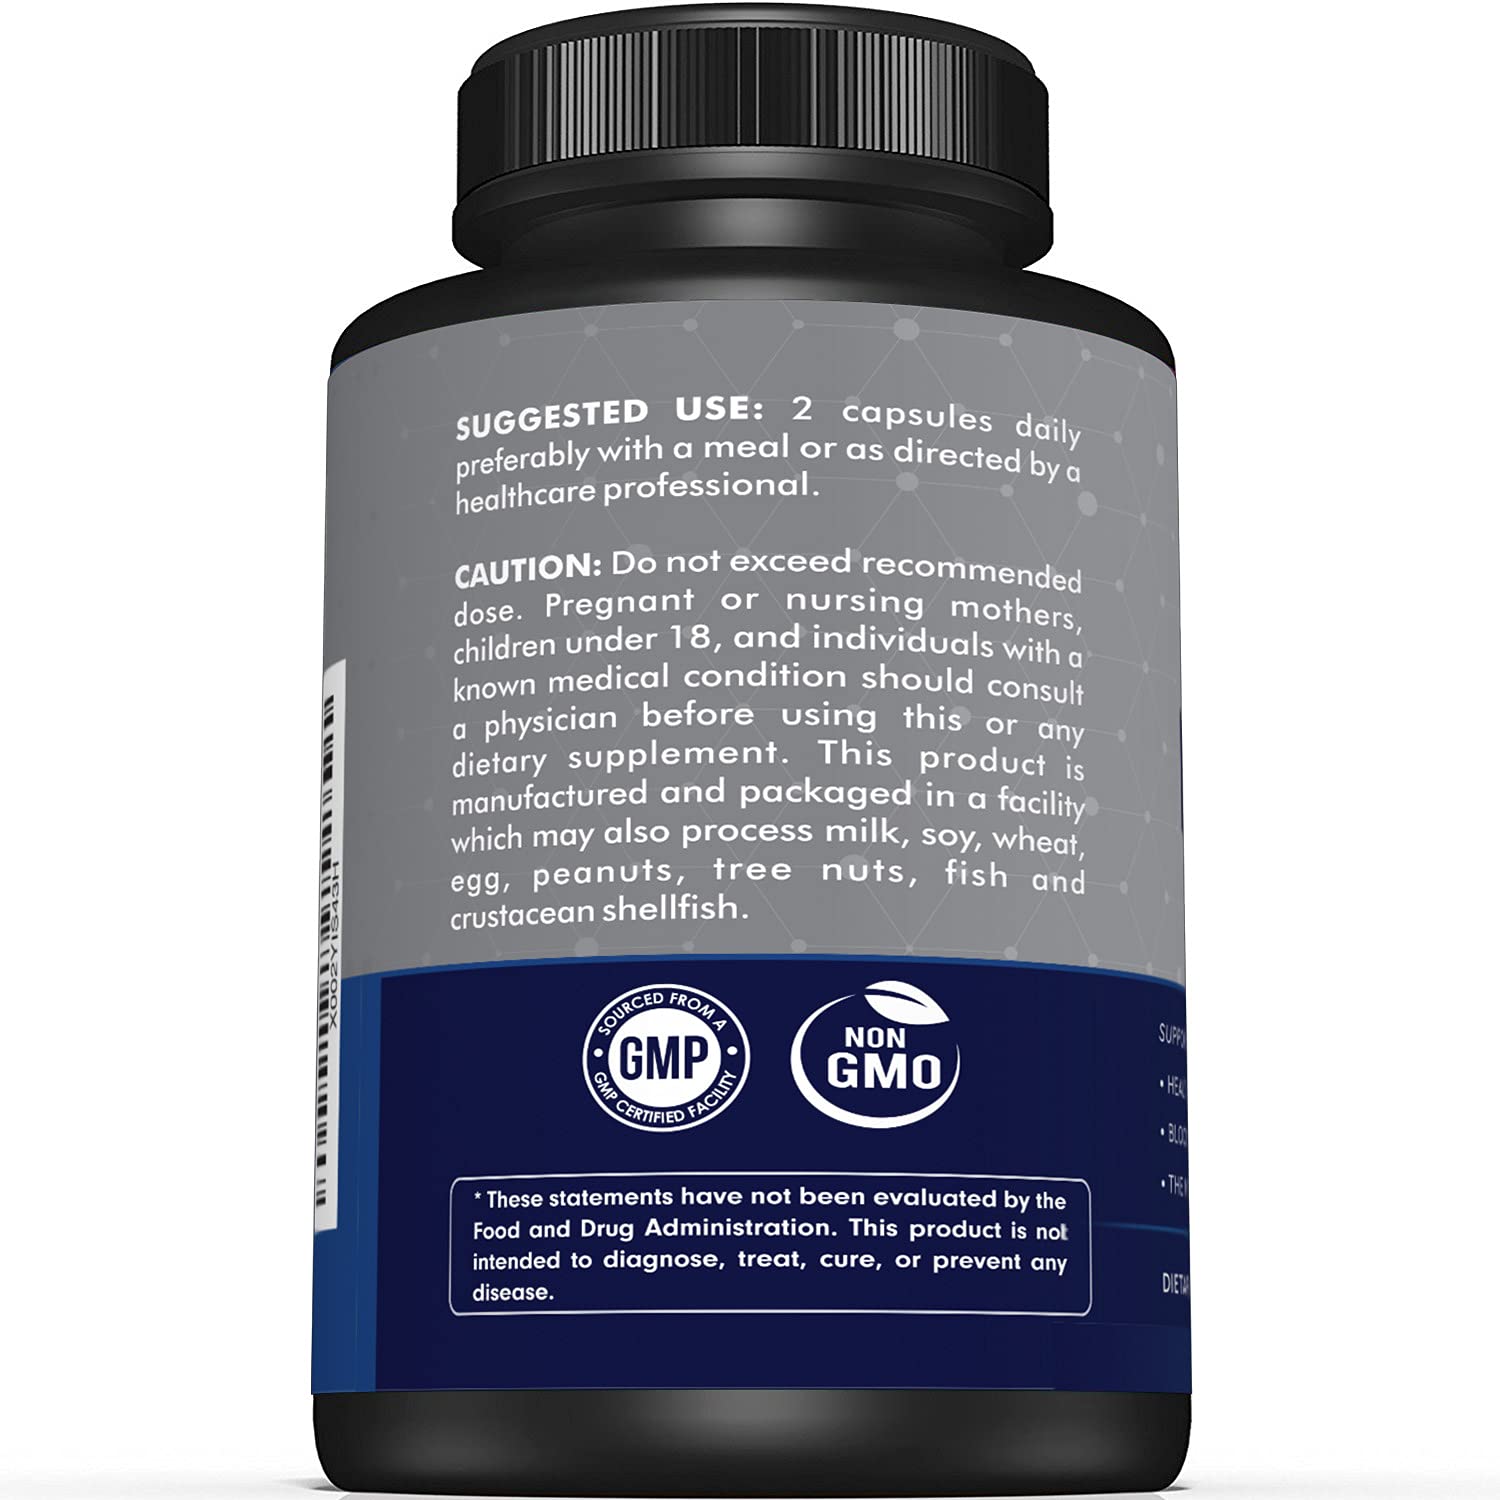 Premium Nerve Support Supplement - with Alpha Lipoic Acid (ALA) 600 mg, Acetyl-L-Carnitine (ALC) & Benfotiamine - Nerve Support Formula for Healthy Circulation, Feet, Hands & Toes - 60 Capsules - image 3 of 3